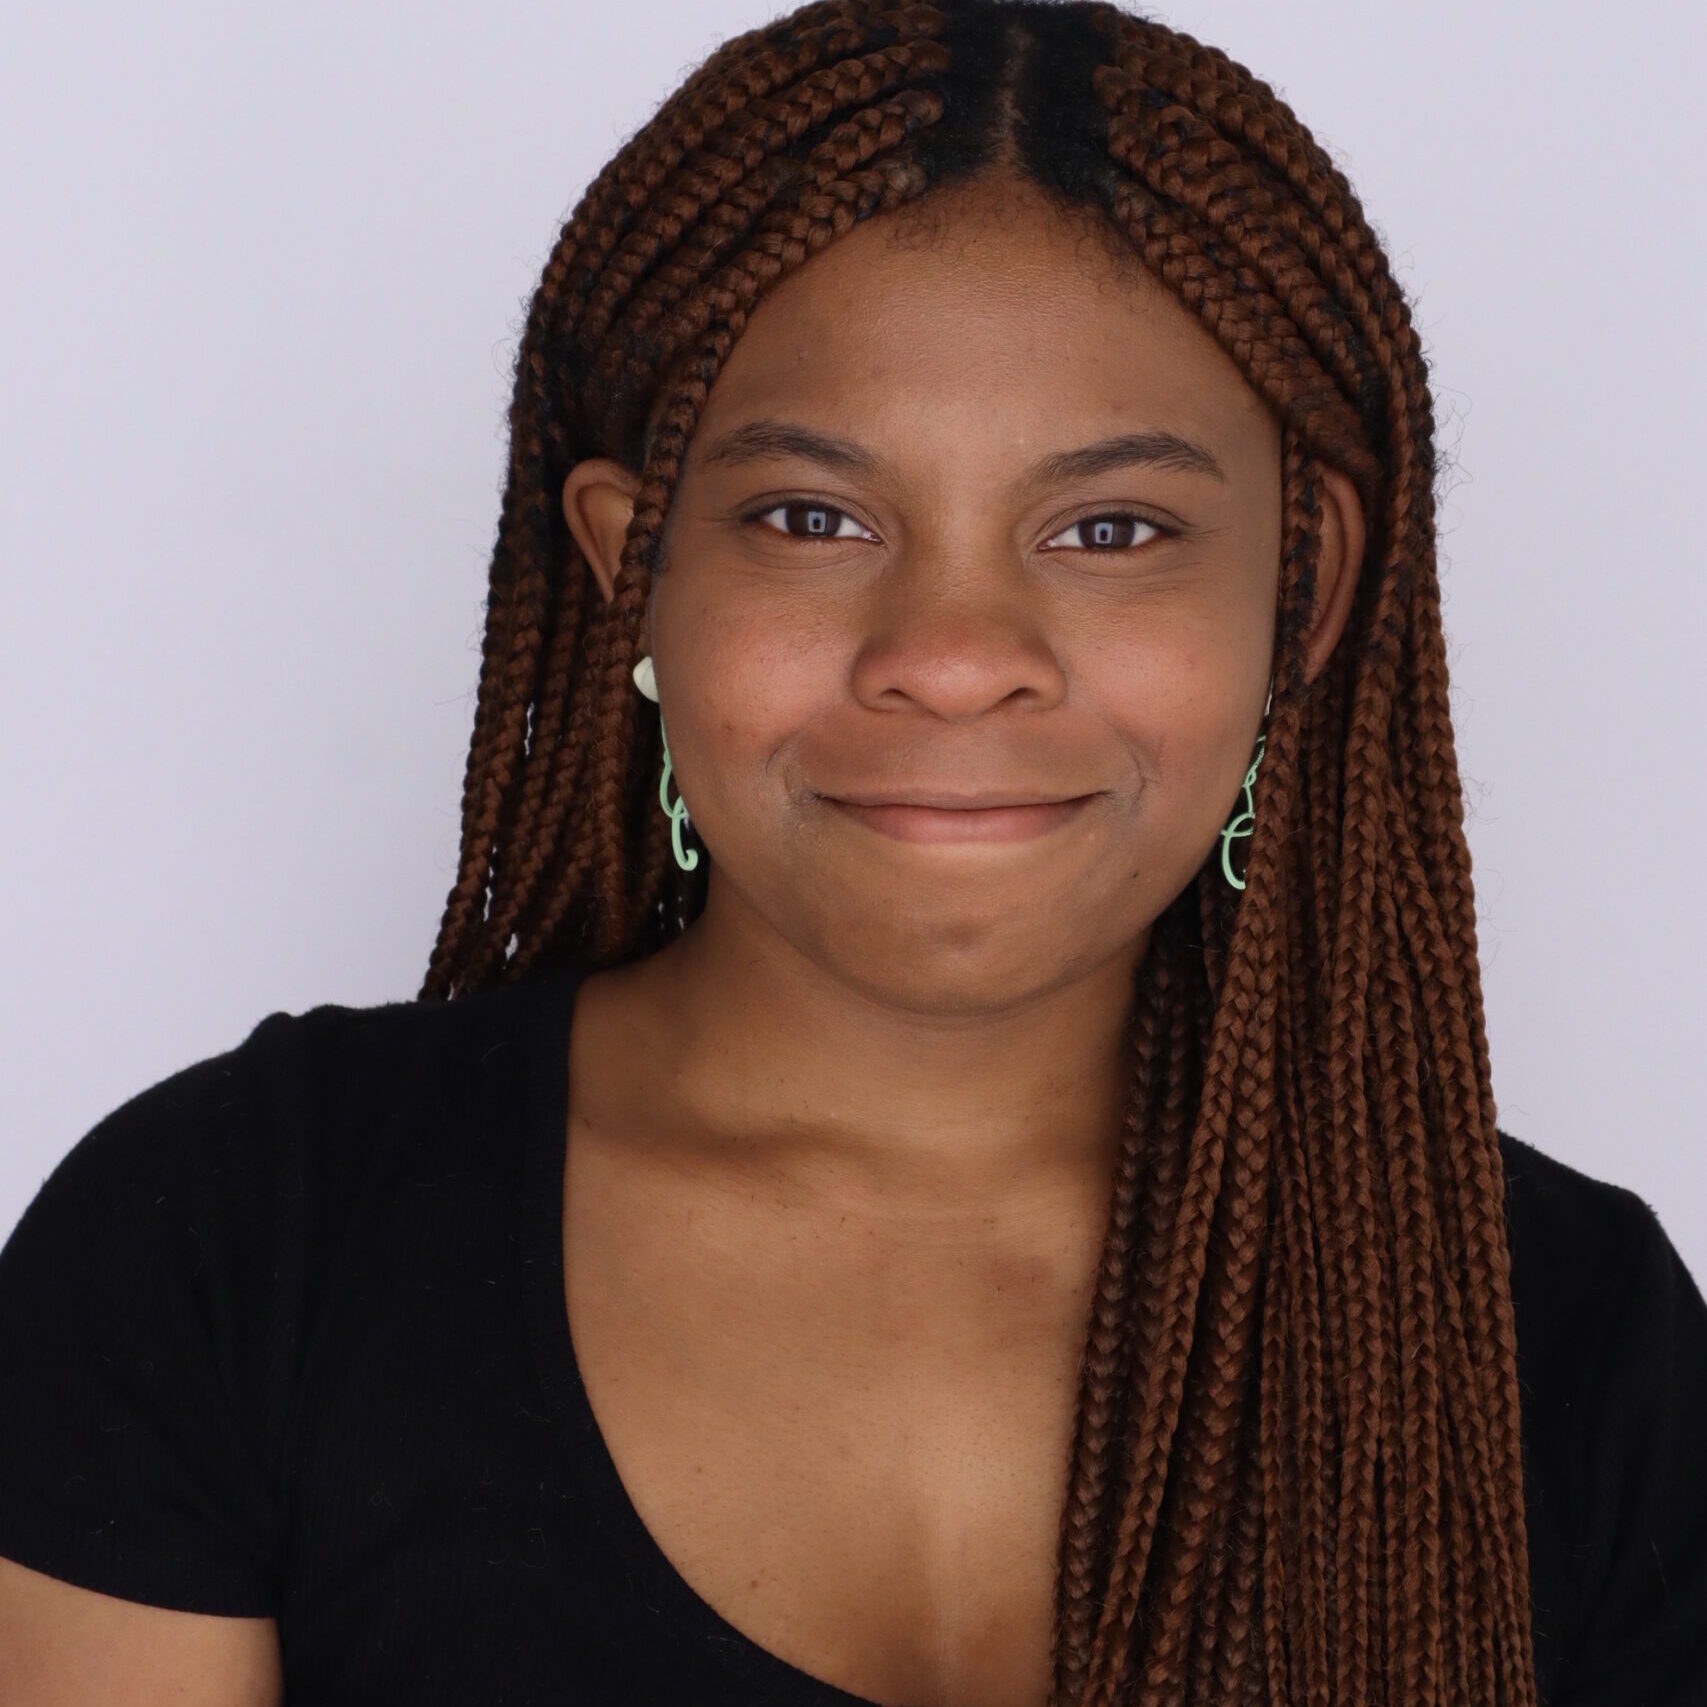 Photograph of journalist Nadia Lathan wearing a black short sleeve top and long braided hair smiling.